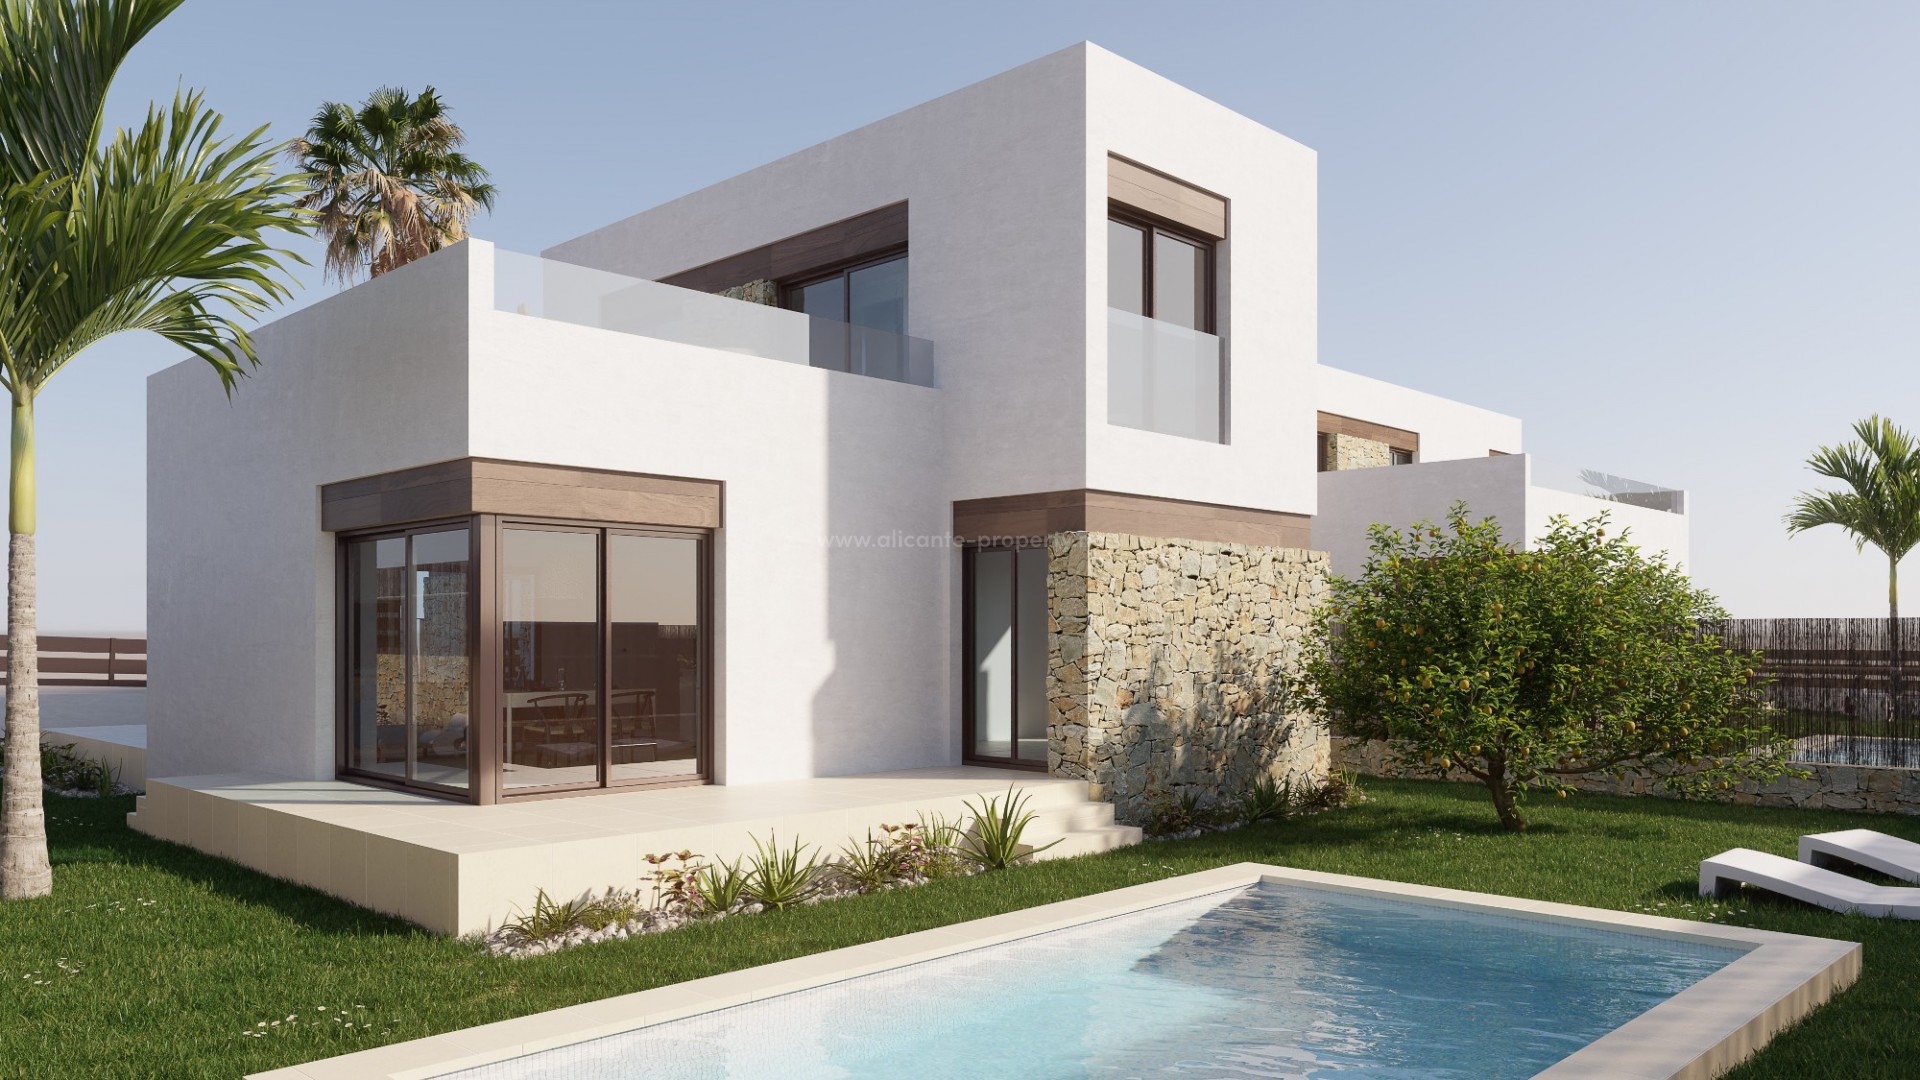 Detached villas in Finestrat, 3/4 bedrooms, 2 bathrooms, close to the best golf course on the Costa Blanca (Alfarella Golf Course), pool and stunning views